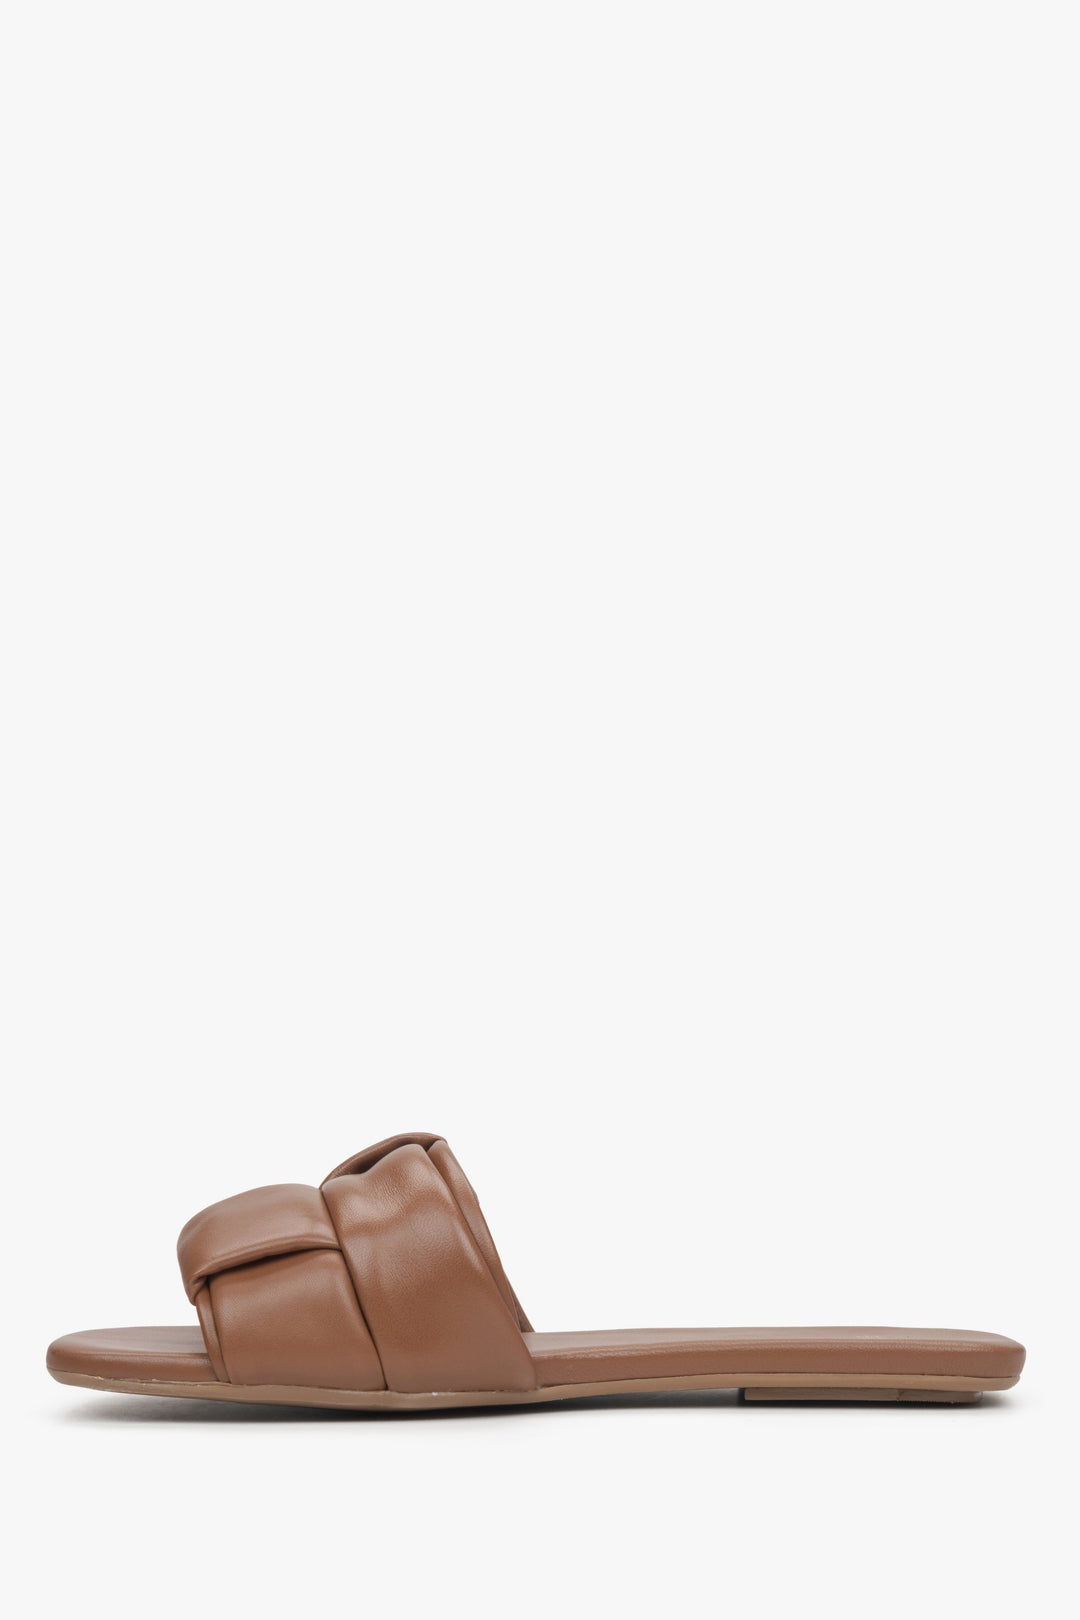 Women's Slide Sandals with Brown Patch Leather